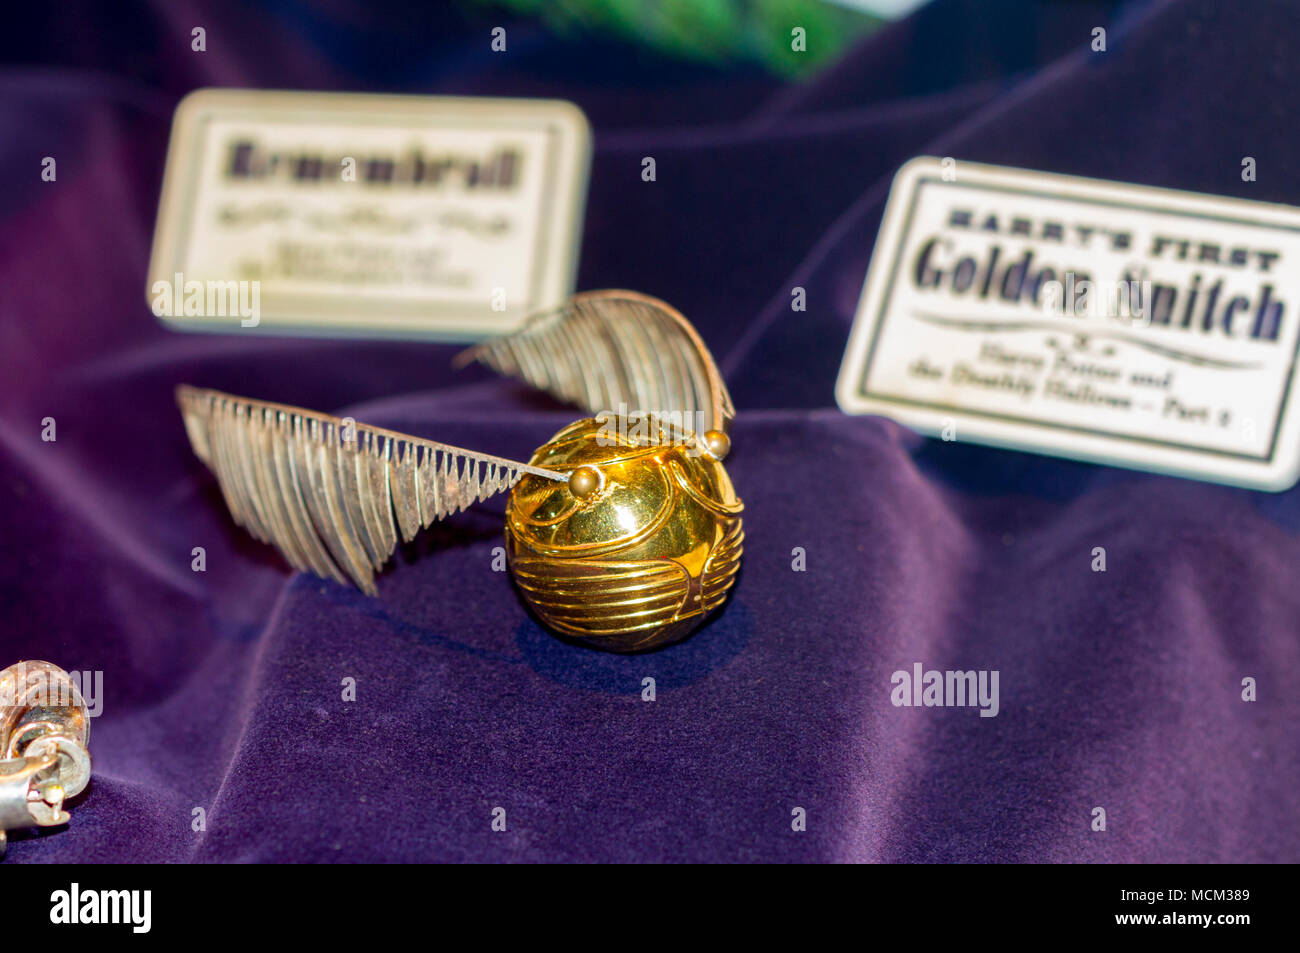 Download Cute Harry Potter Golden Snitch Wallpaper